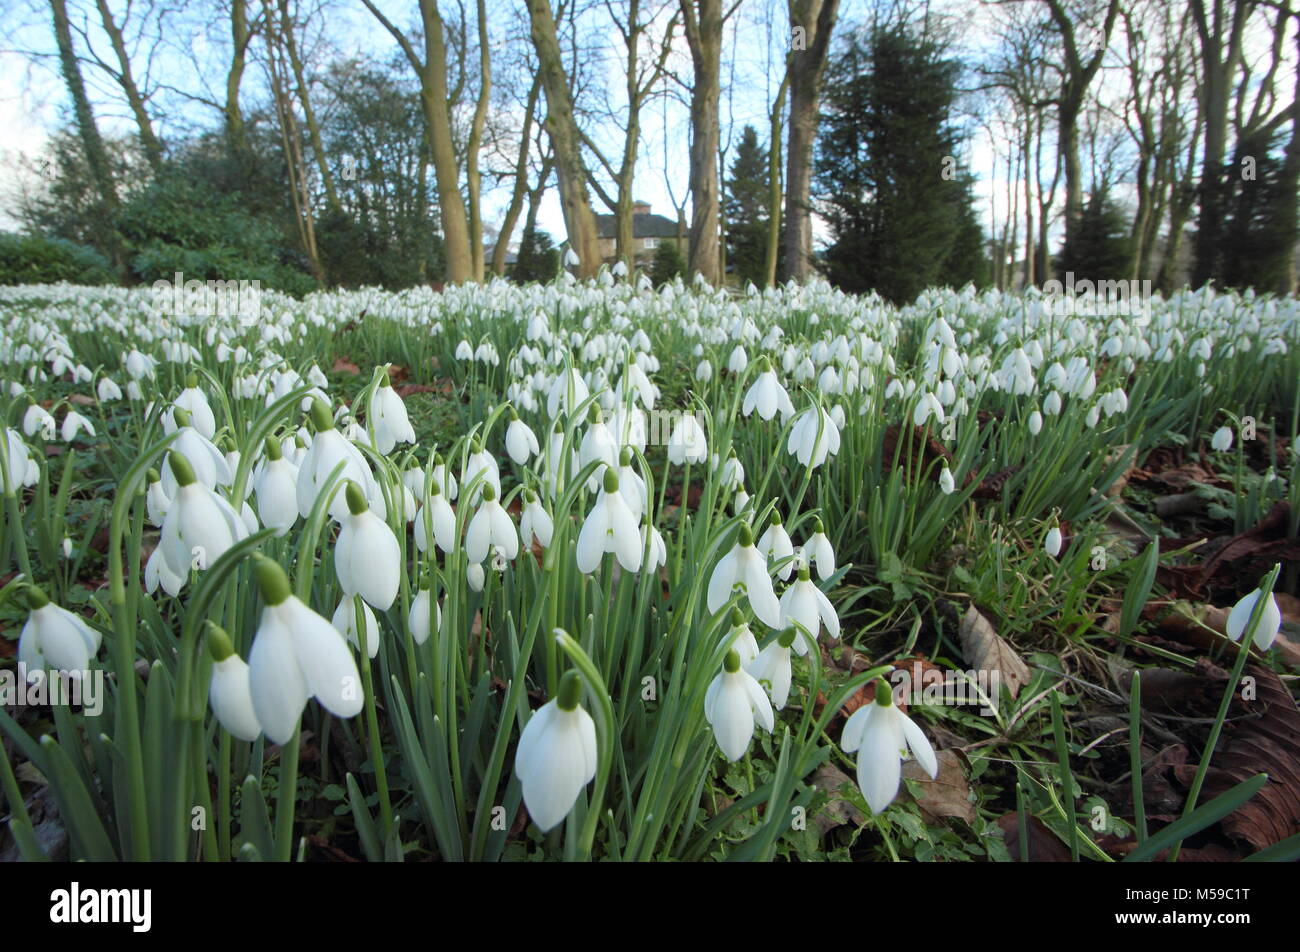 Snowdrops (galanthus nivalis) in the woodland garden at Hopton Hall, Derbyshire during the annual open garden event in February. UK Stock Photo